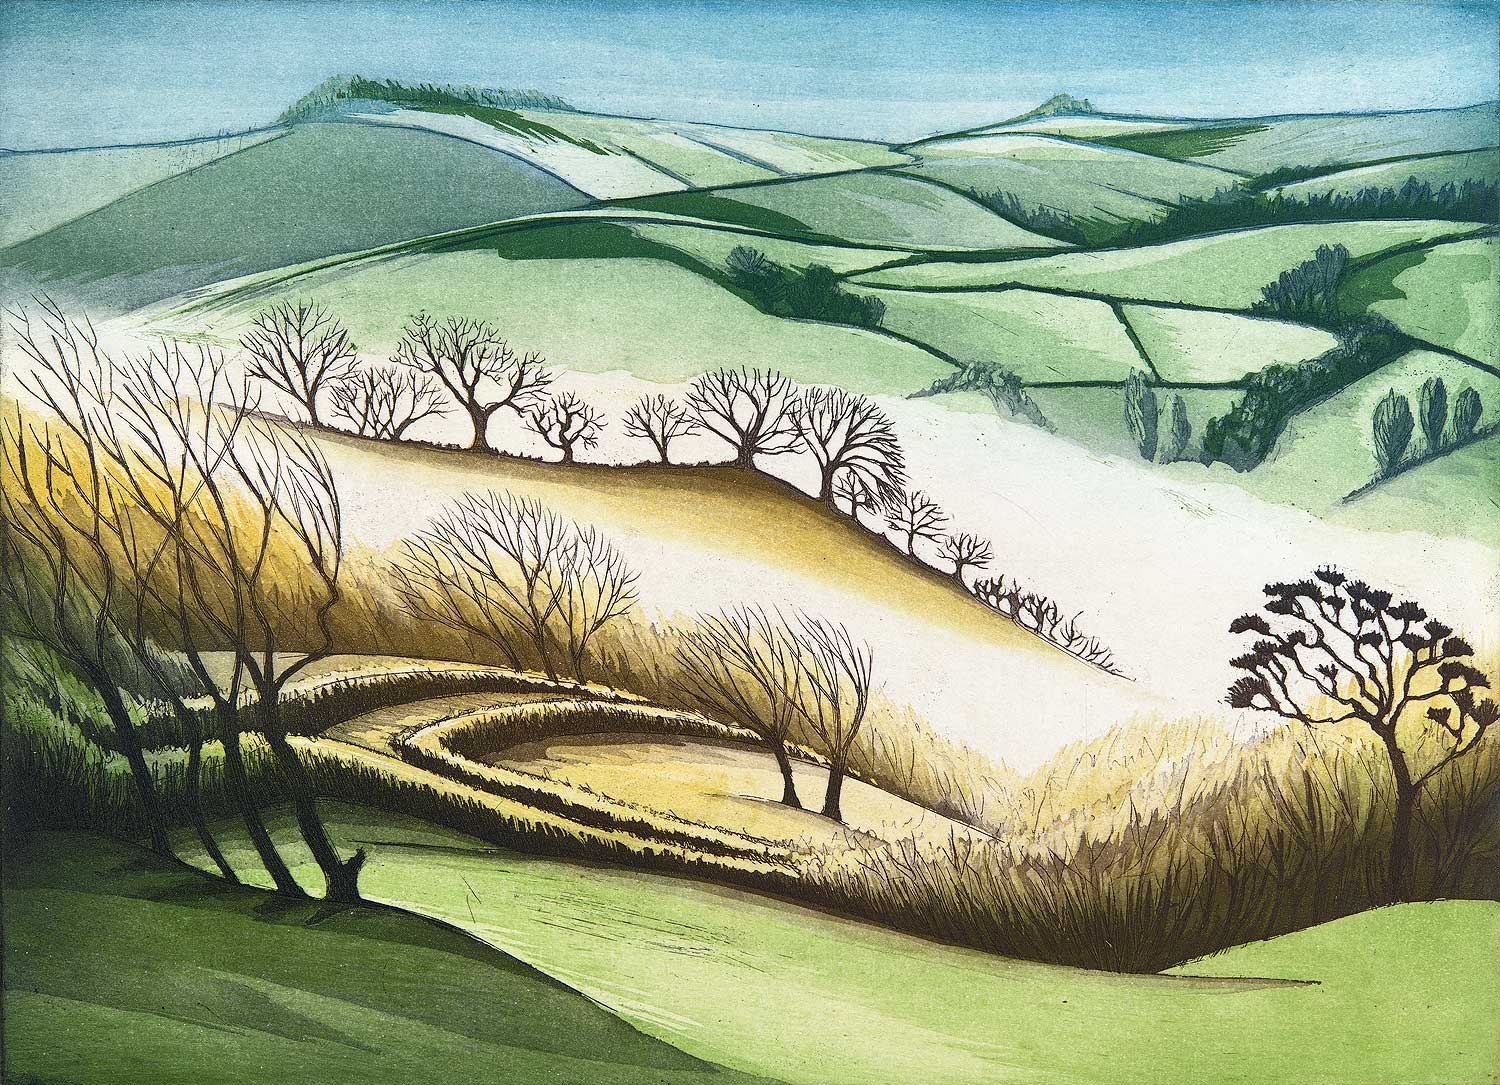 'Mist in the Valley' by Morna Rhys